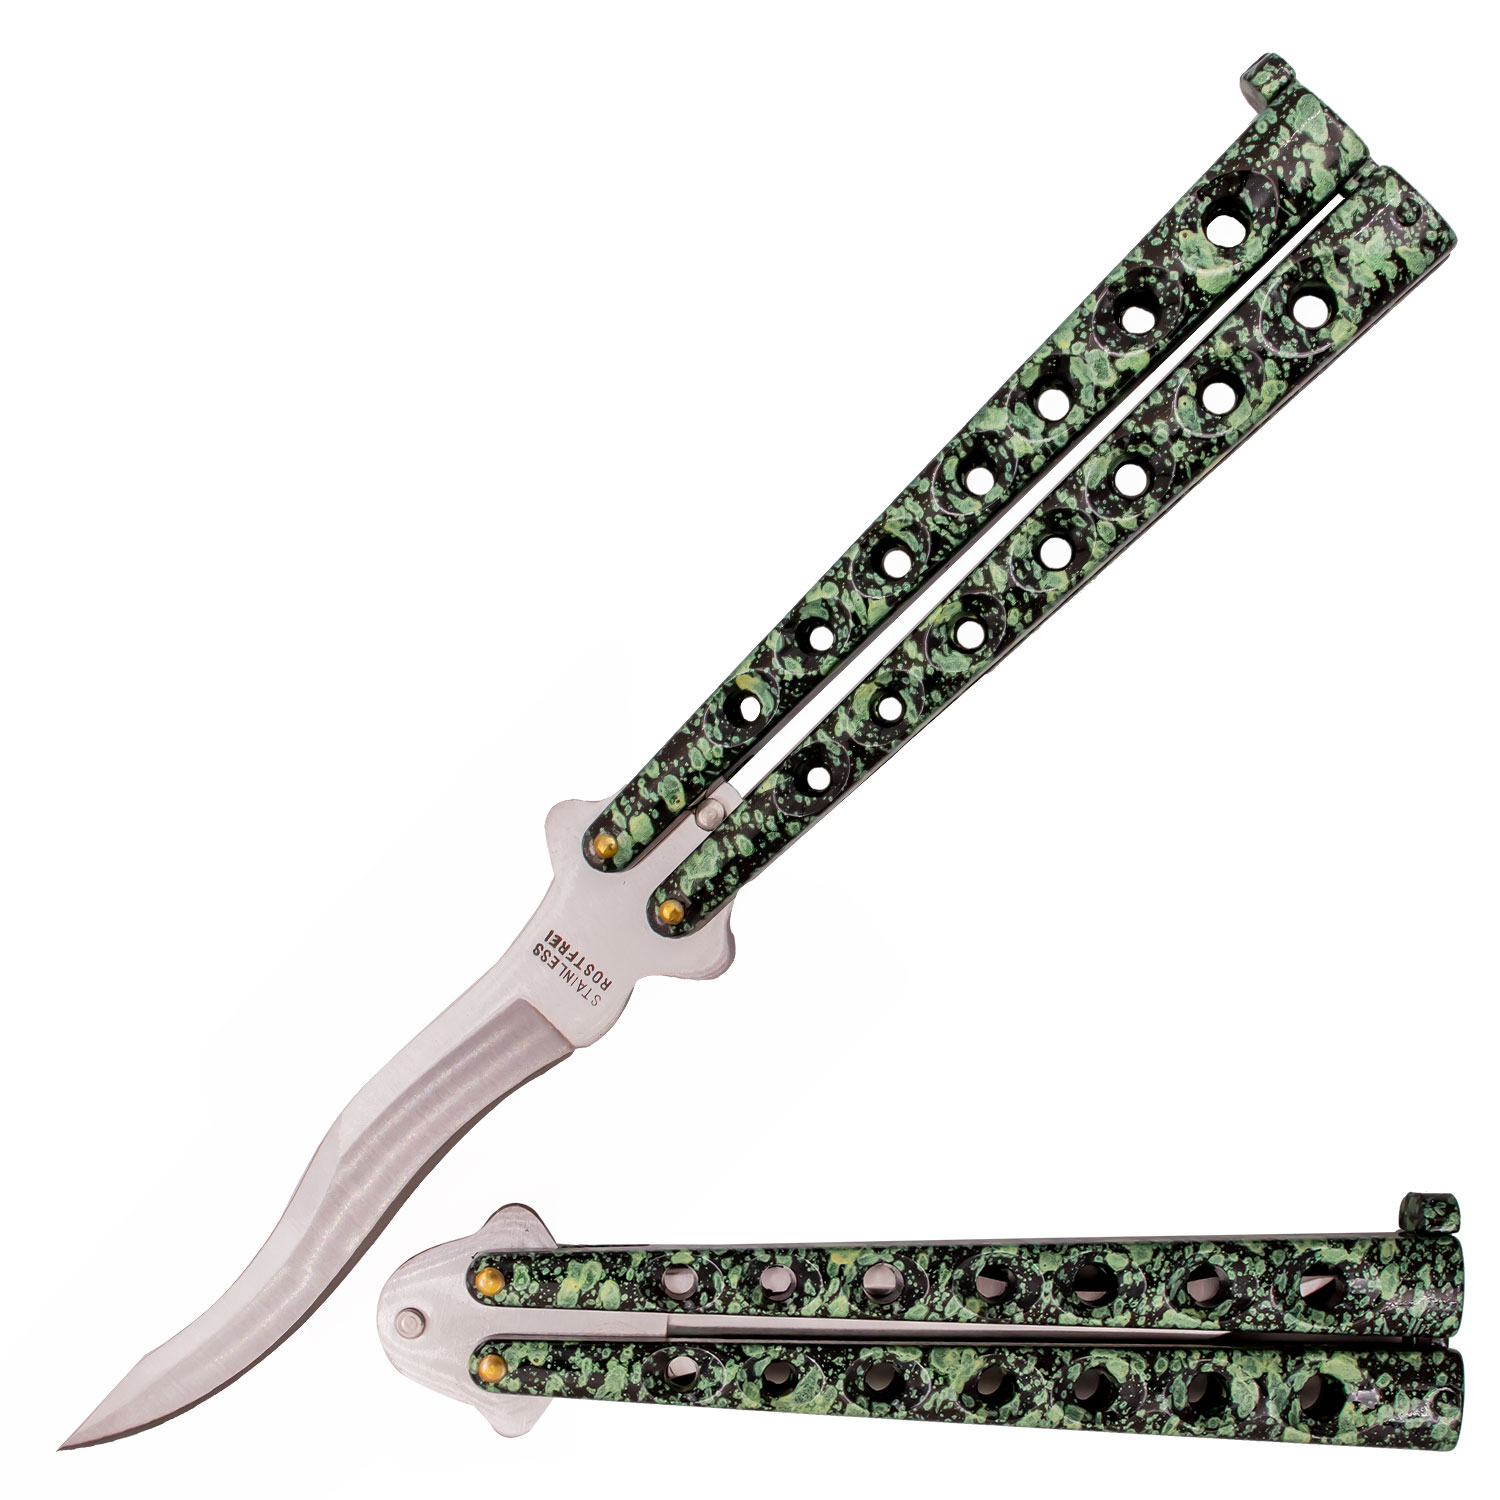 8.8 Inch Kriss Blade Butterfly Knife (Green and Black)